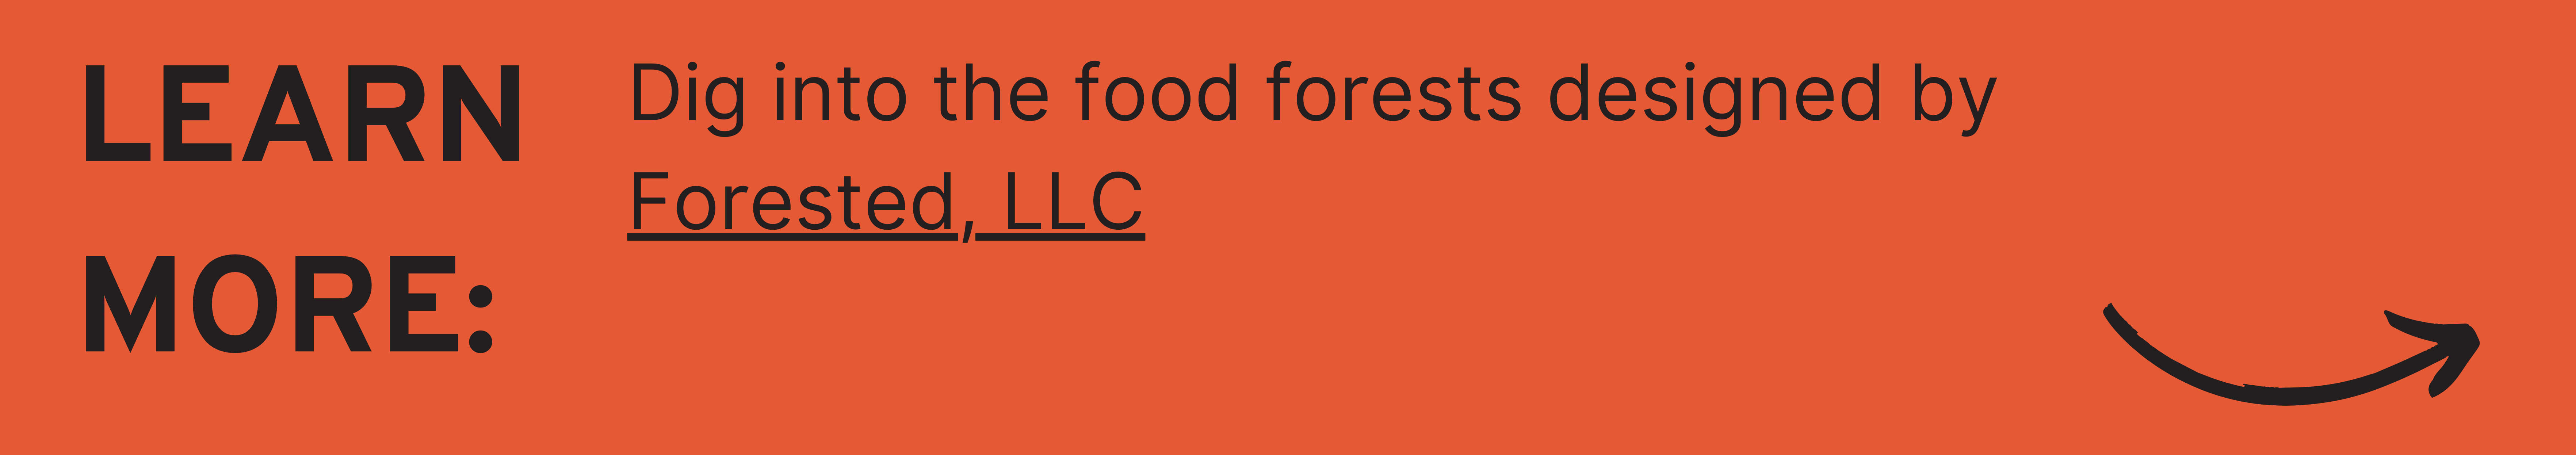 Learn More: Dig into the food forests designed by Forested, LLC 